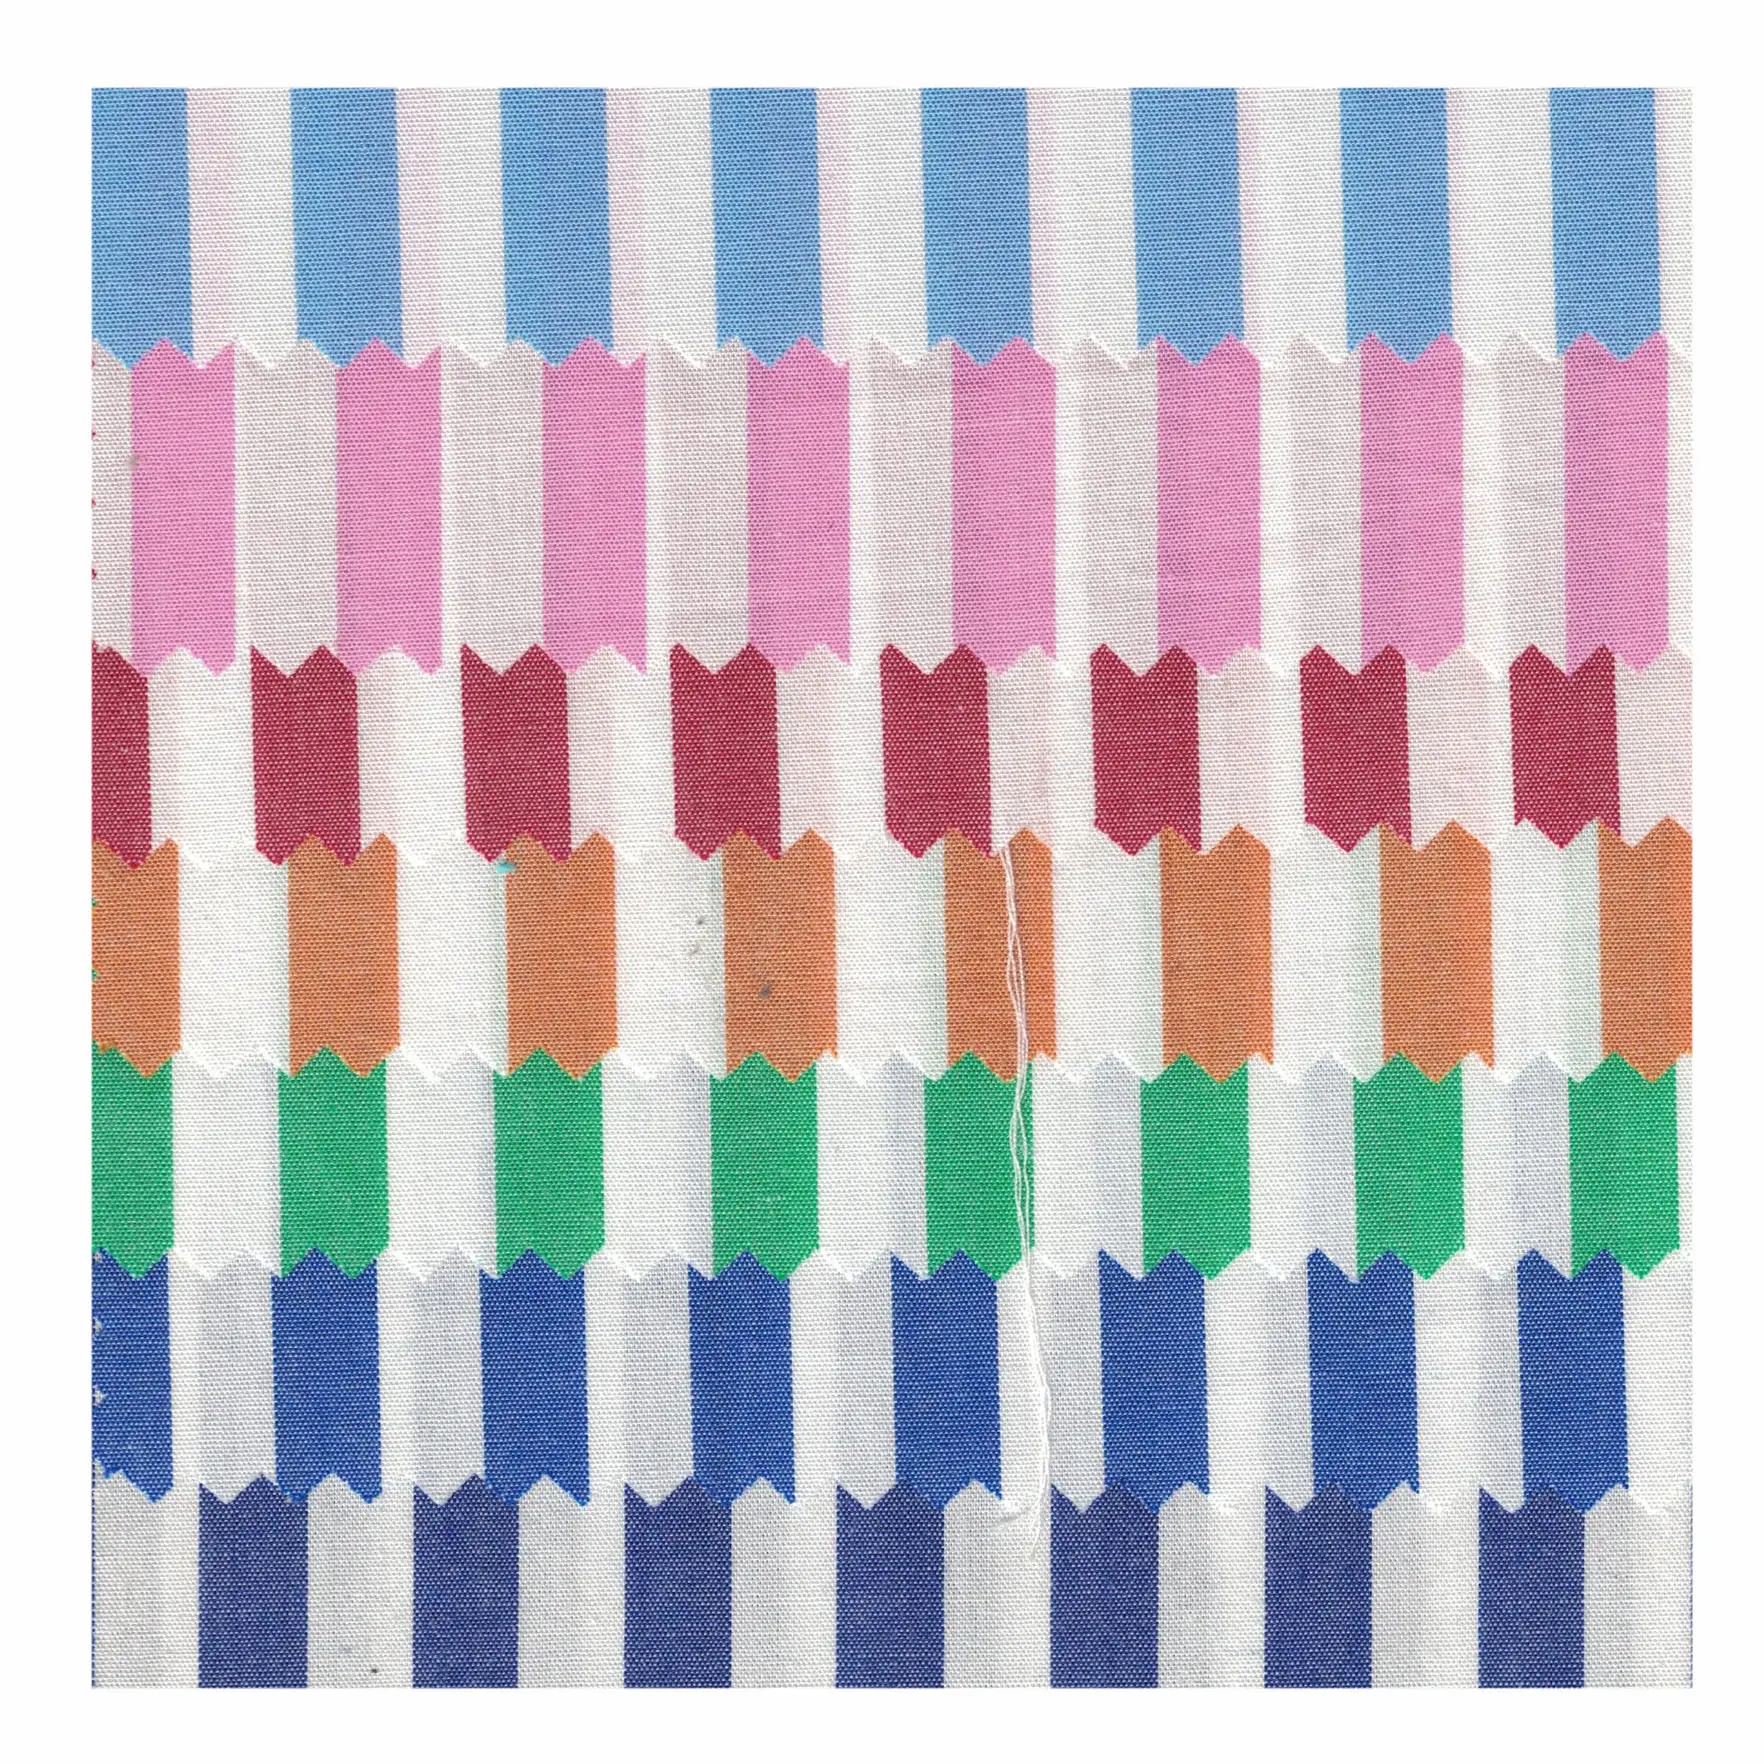 YARN DYED STRIPE FABRIC SERIES WITH READY GOODS